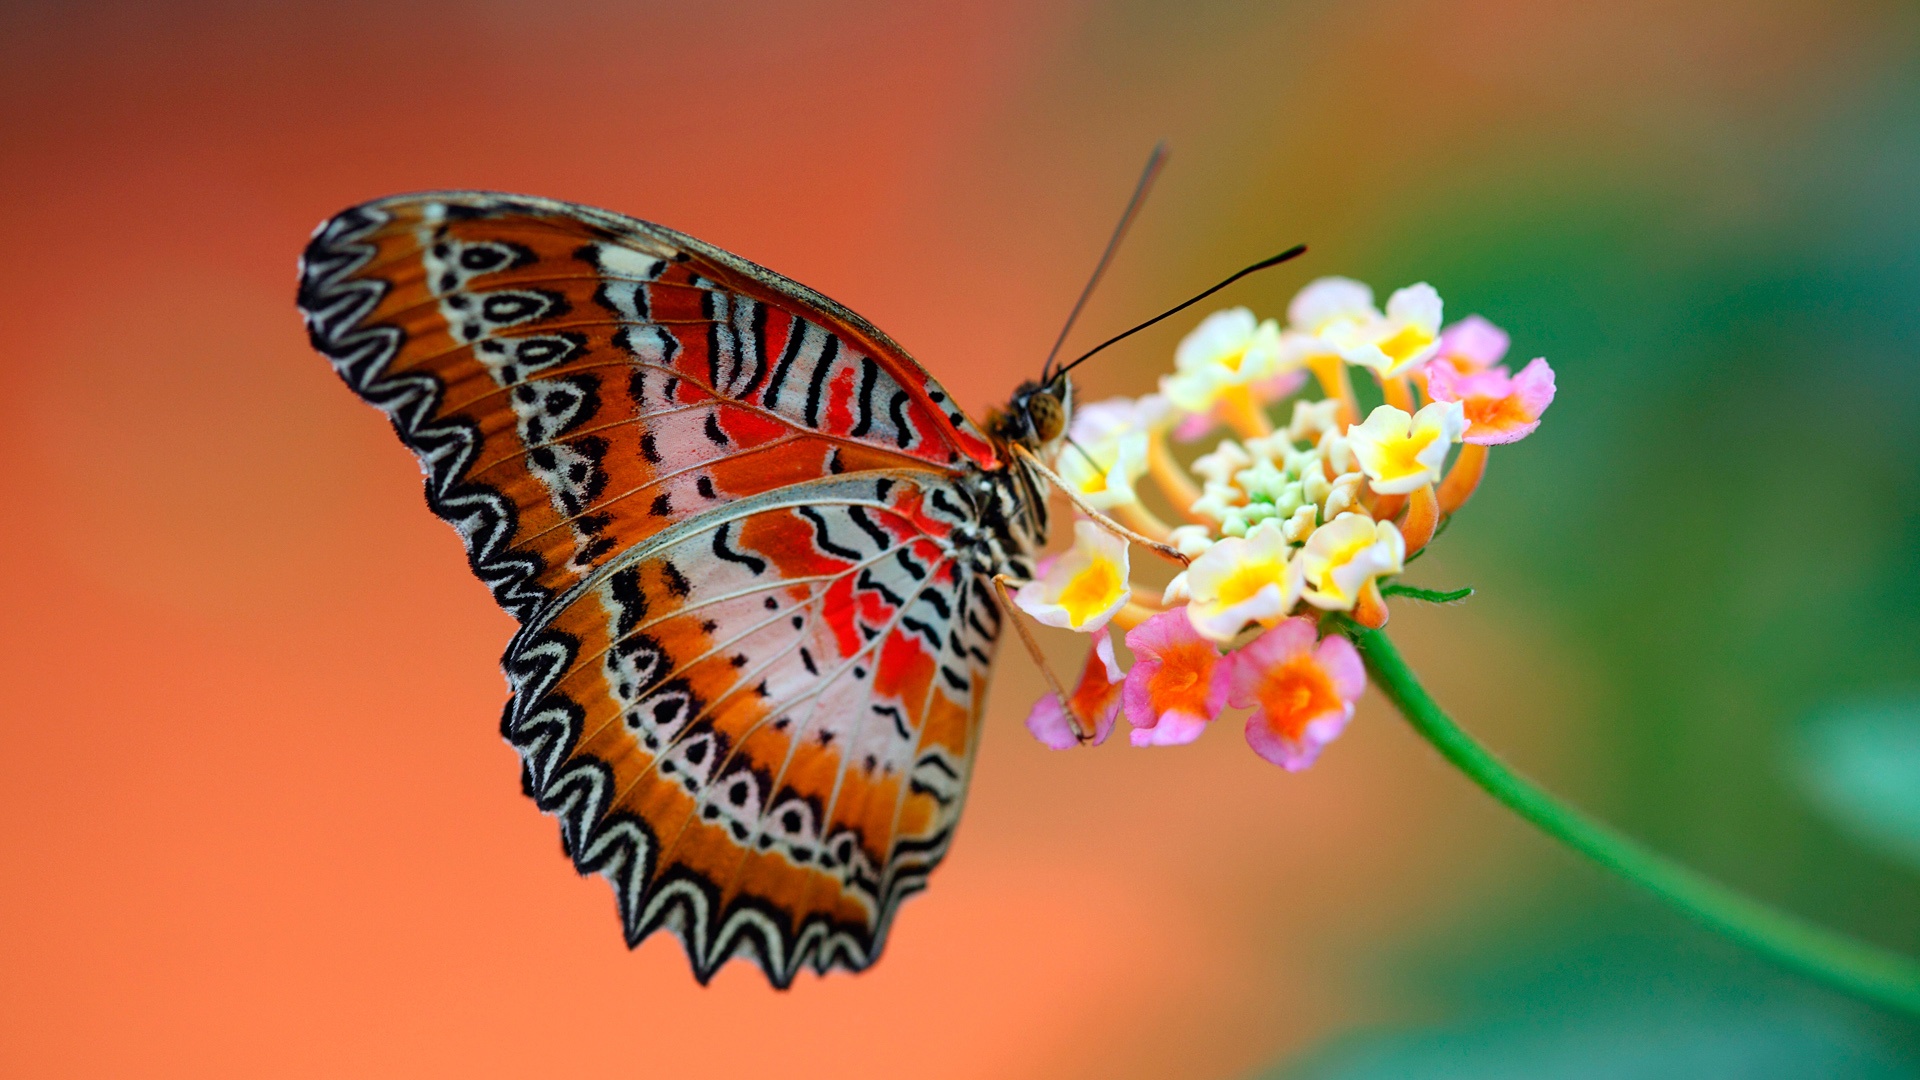 Cool Butterfly HD Wallpaper 1080p In Image